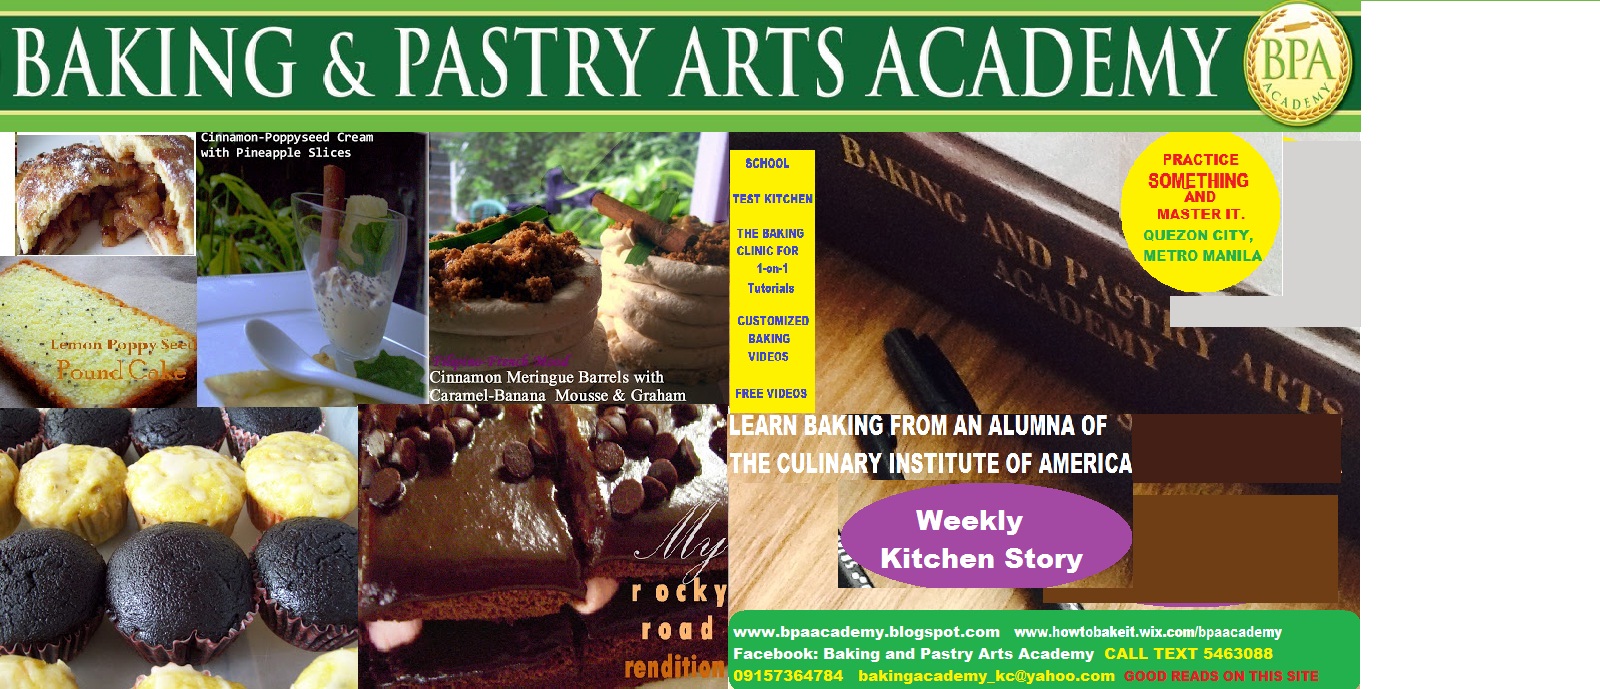 Baking and Pastry Arts Academy's Test Kitchen Recipes